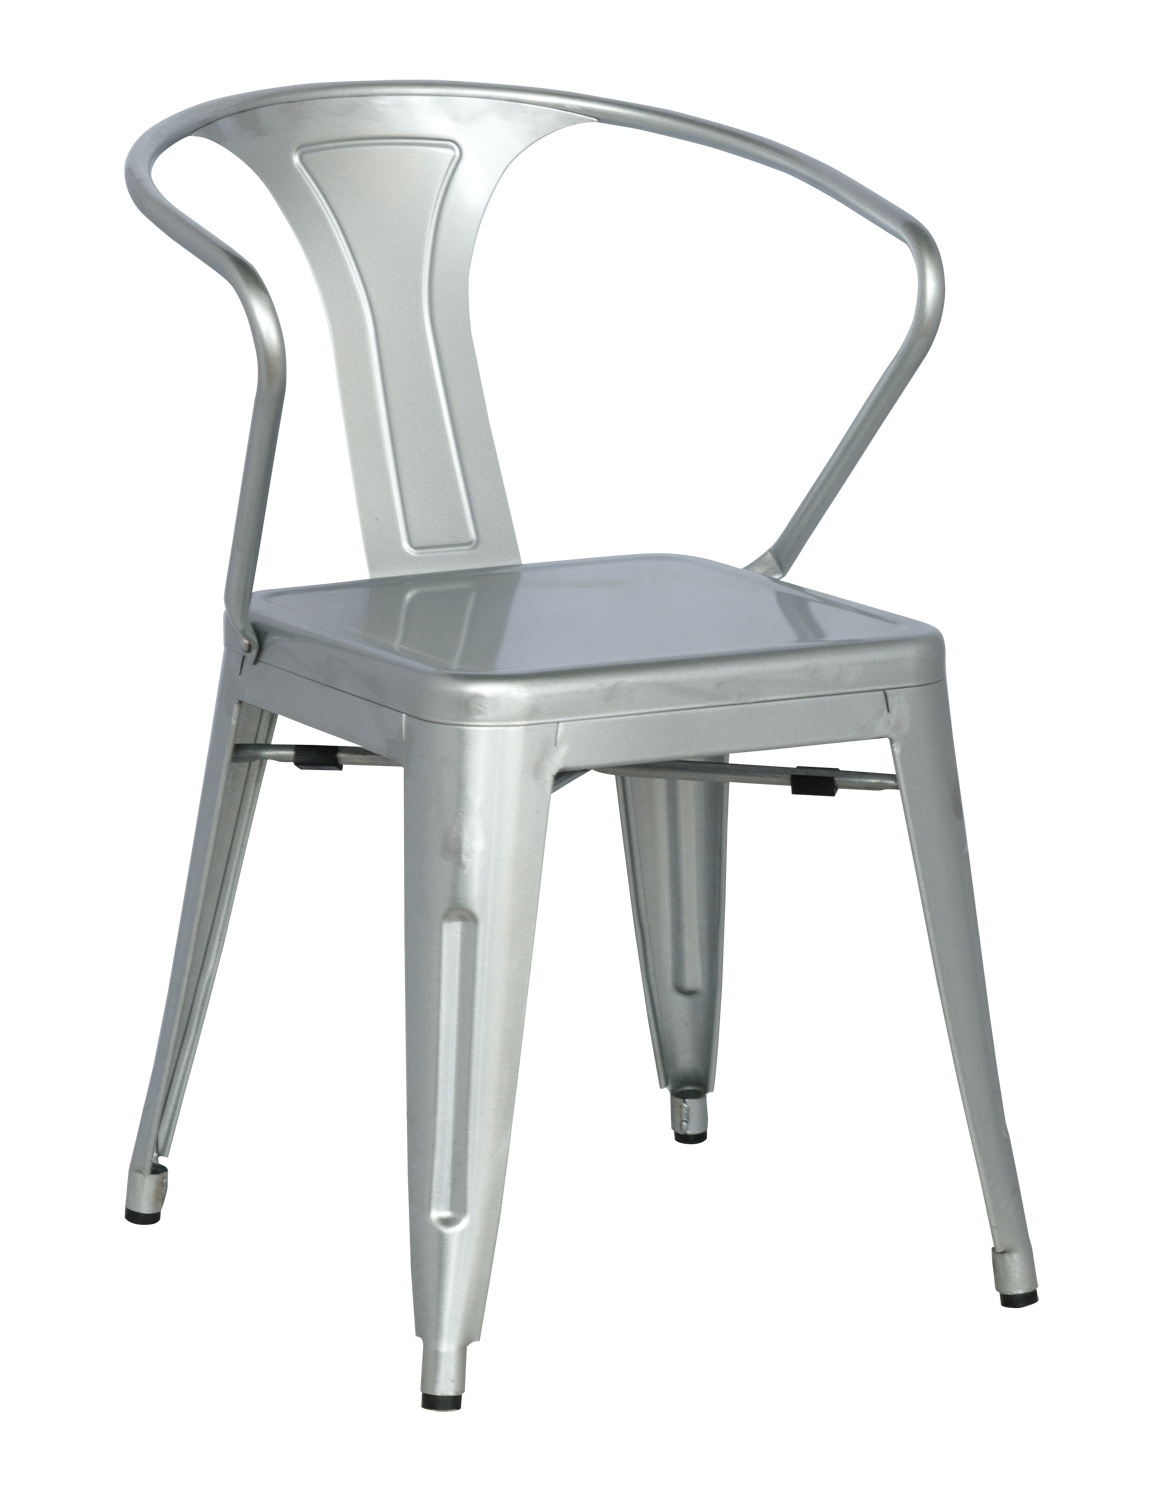 Chintaly Imports 8023 Galvanized Steel Side Chair - Shiny Silver